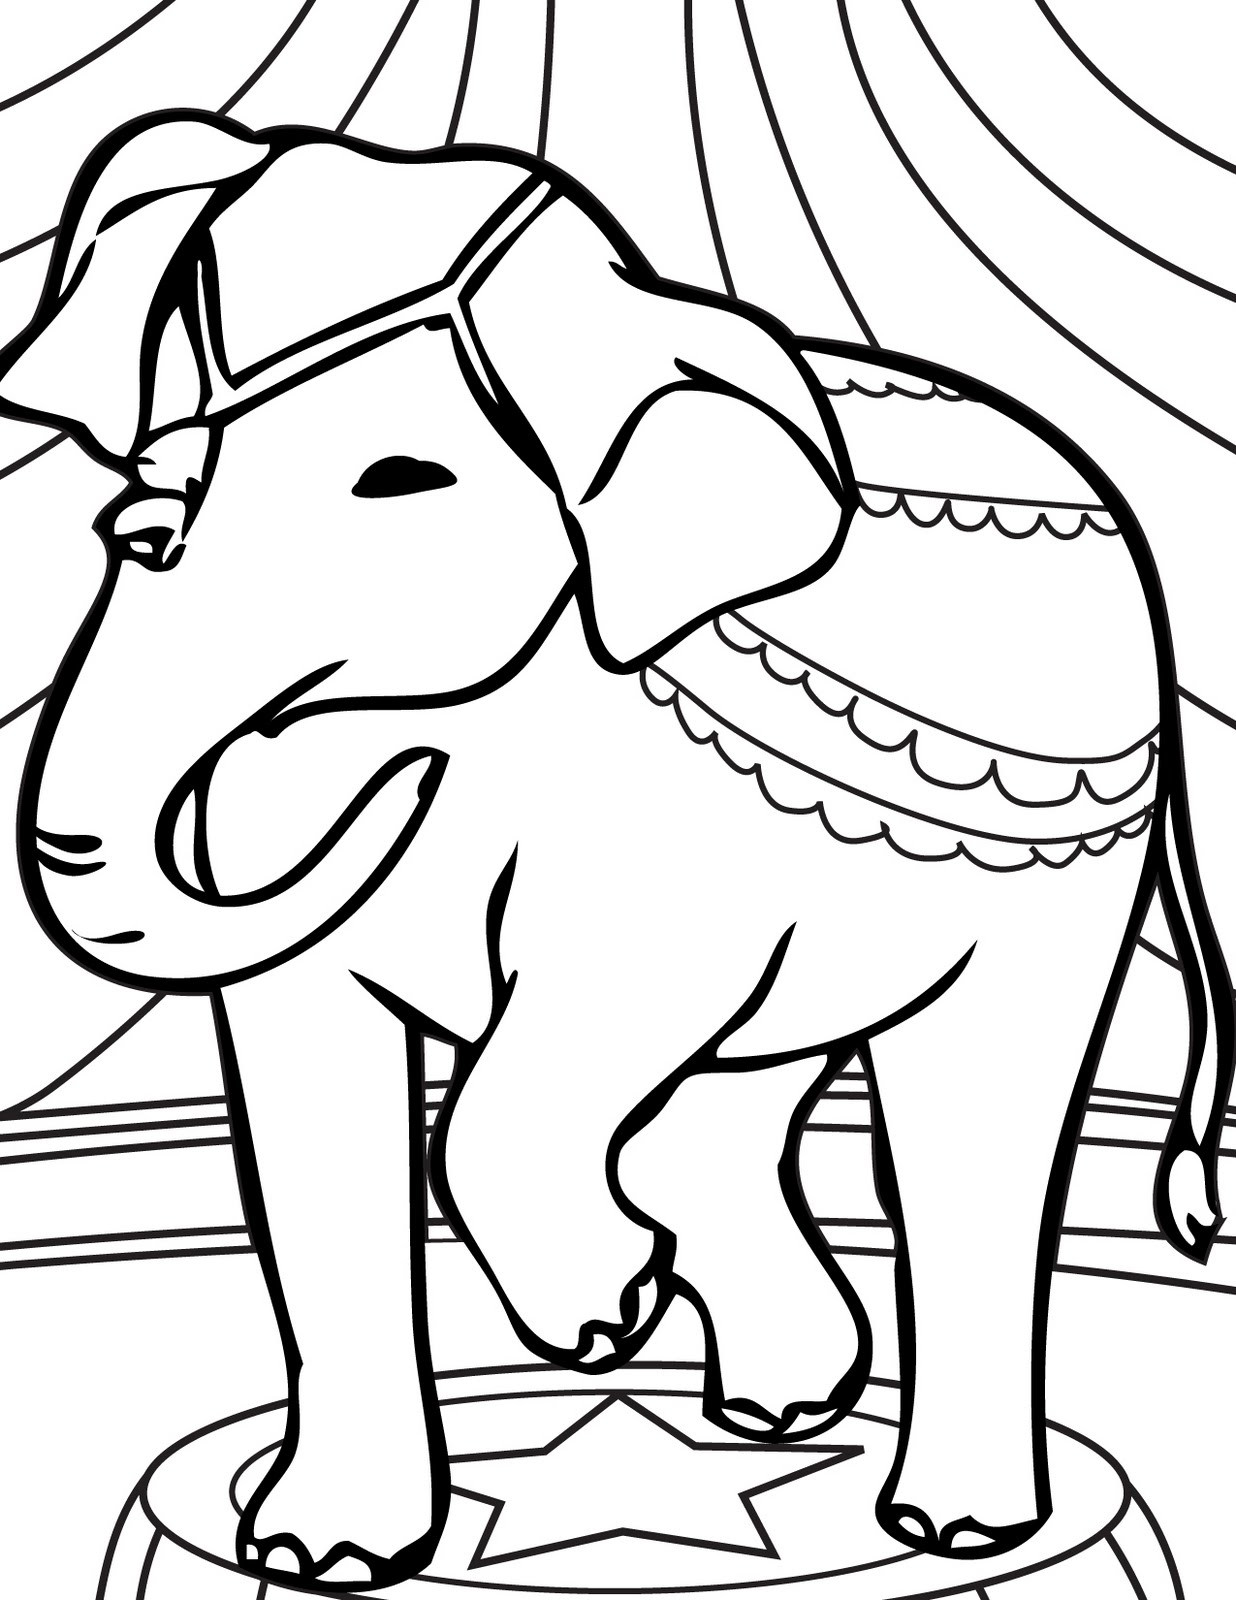 Coloring Sheets For Children
 transmissionpress Circus Elephant Coloring Pages